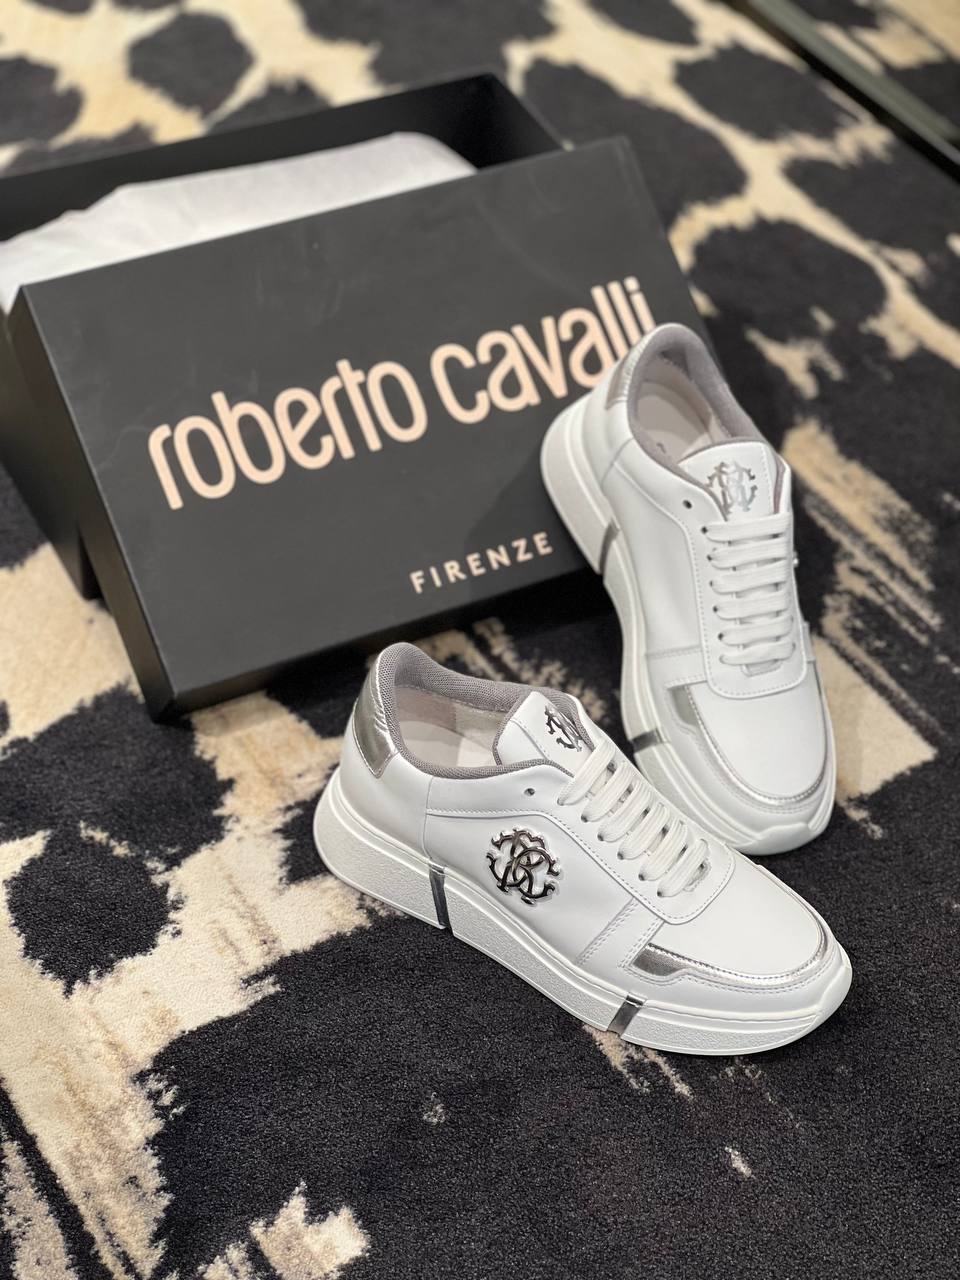 Roberto Cavalli Outlets 4693